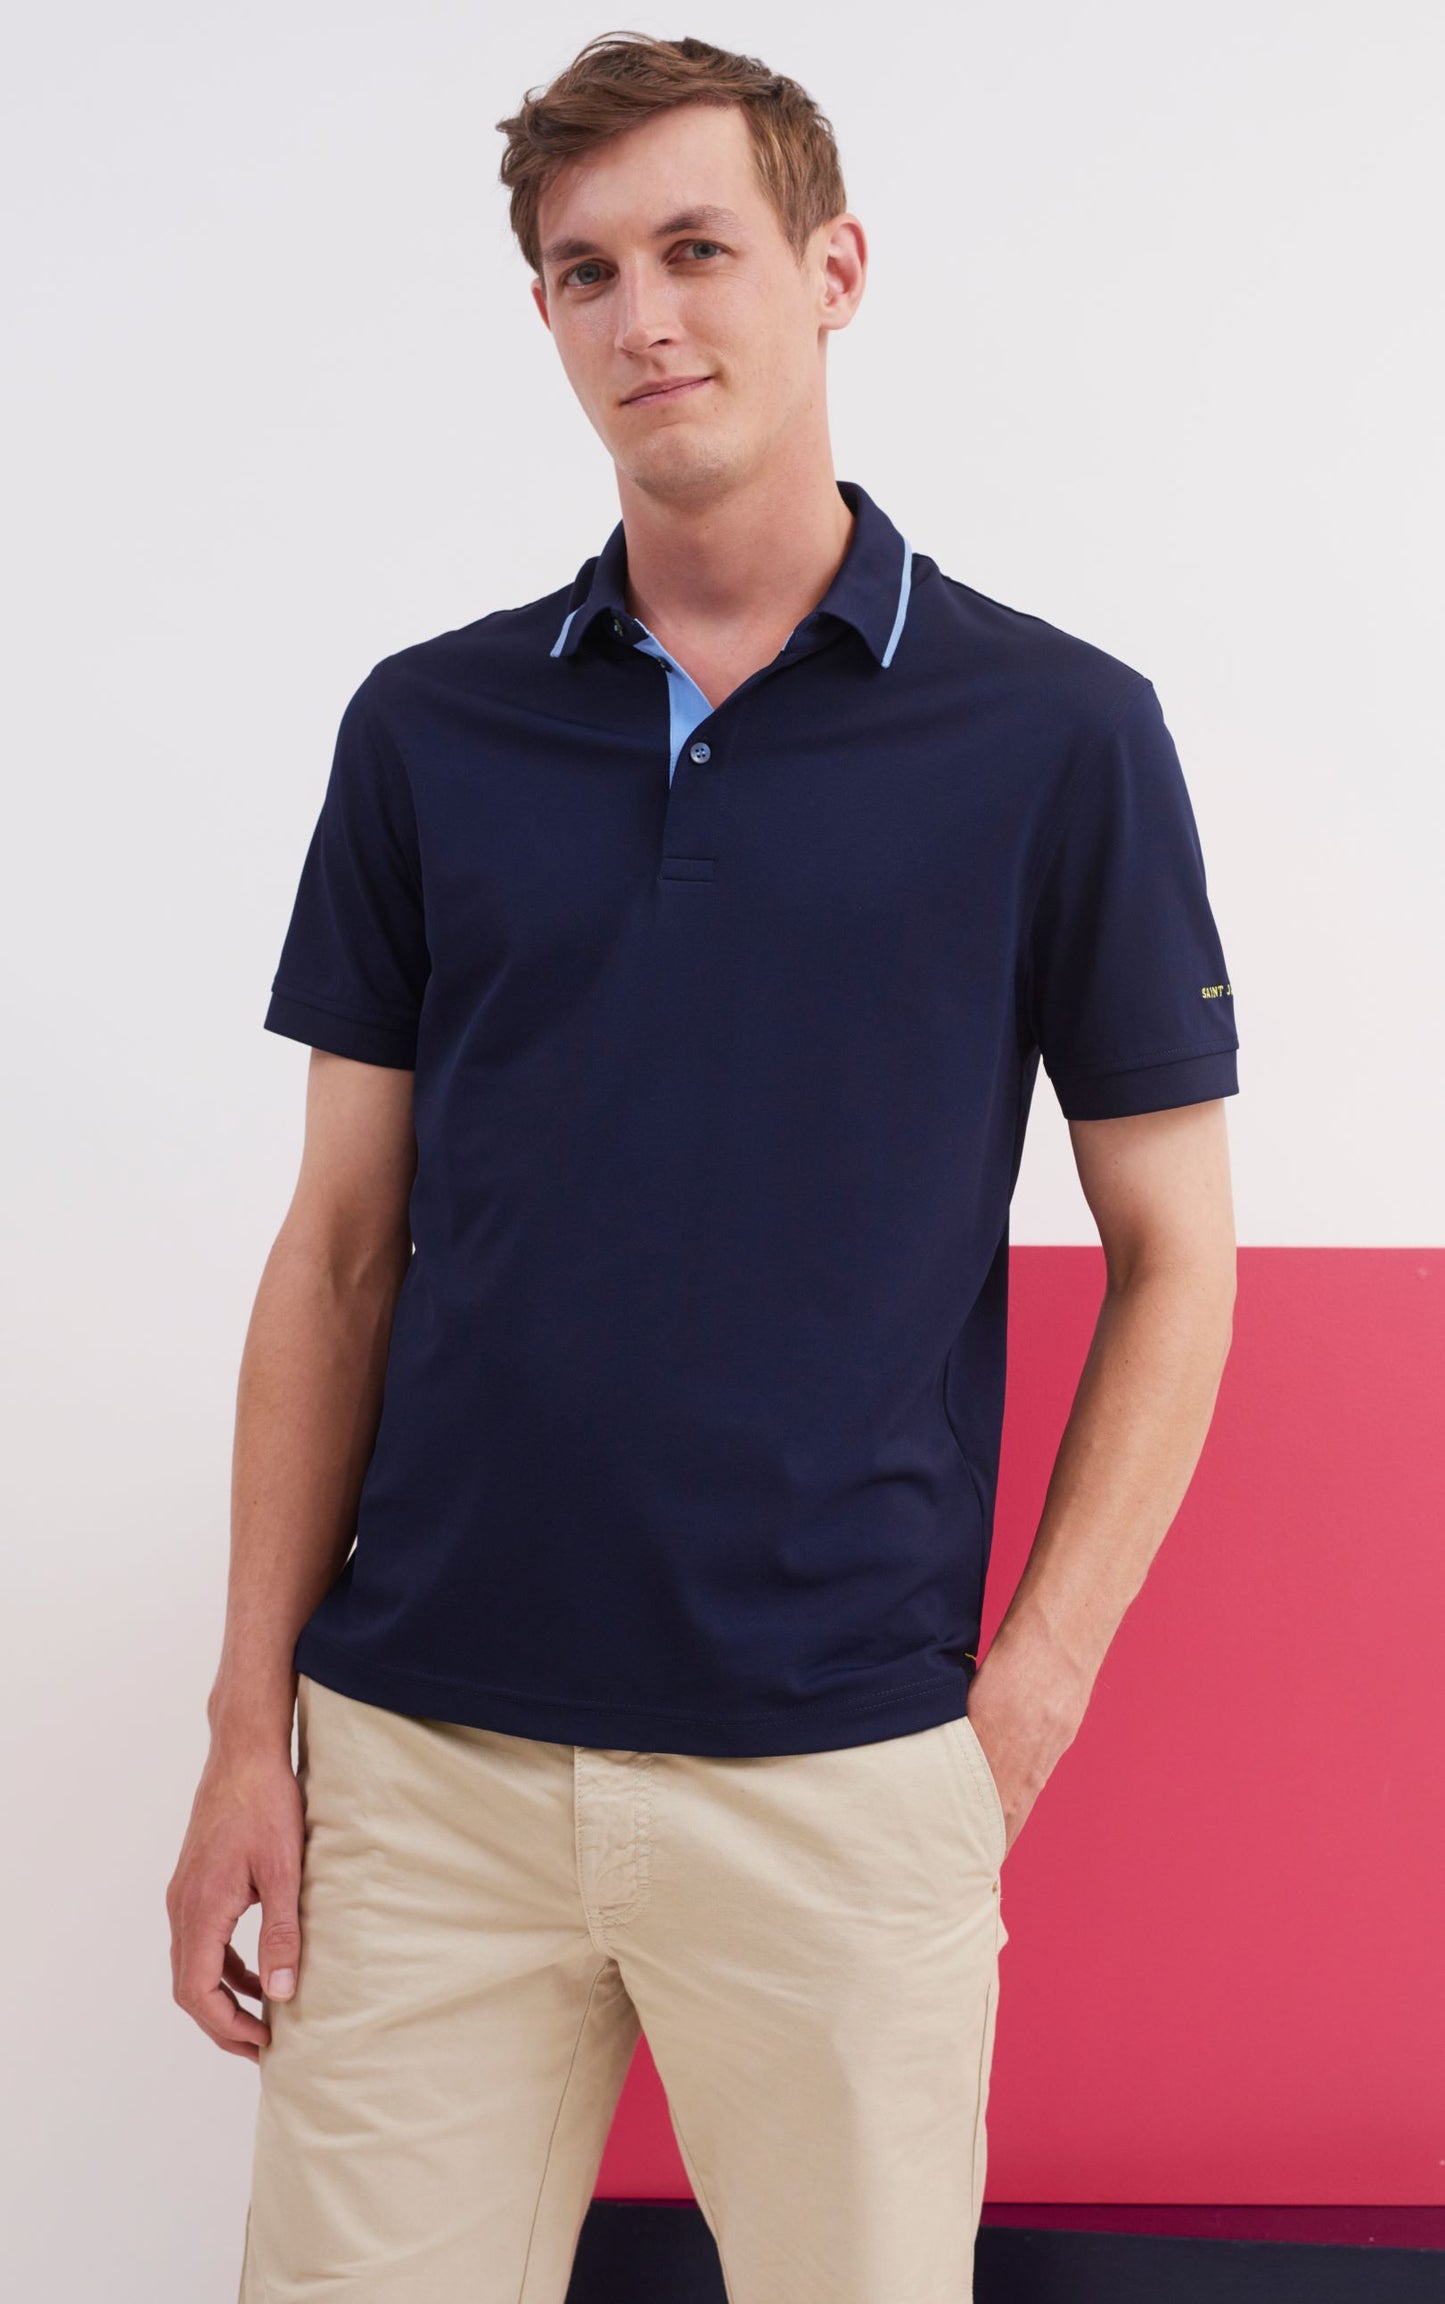 Saint James Polo Shirt In Regular Fit.   The Nael